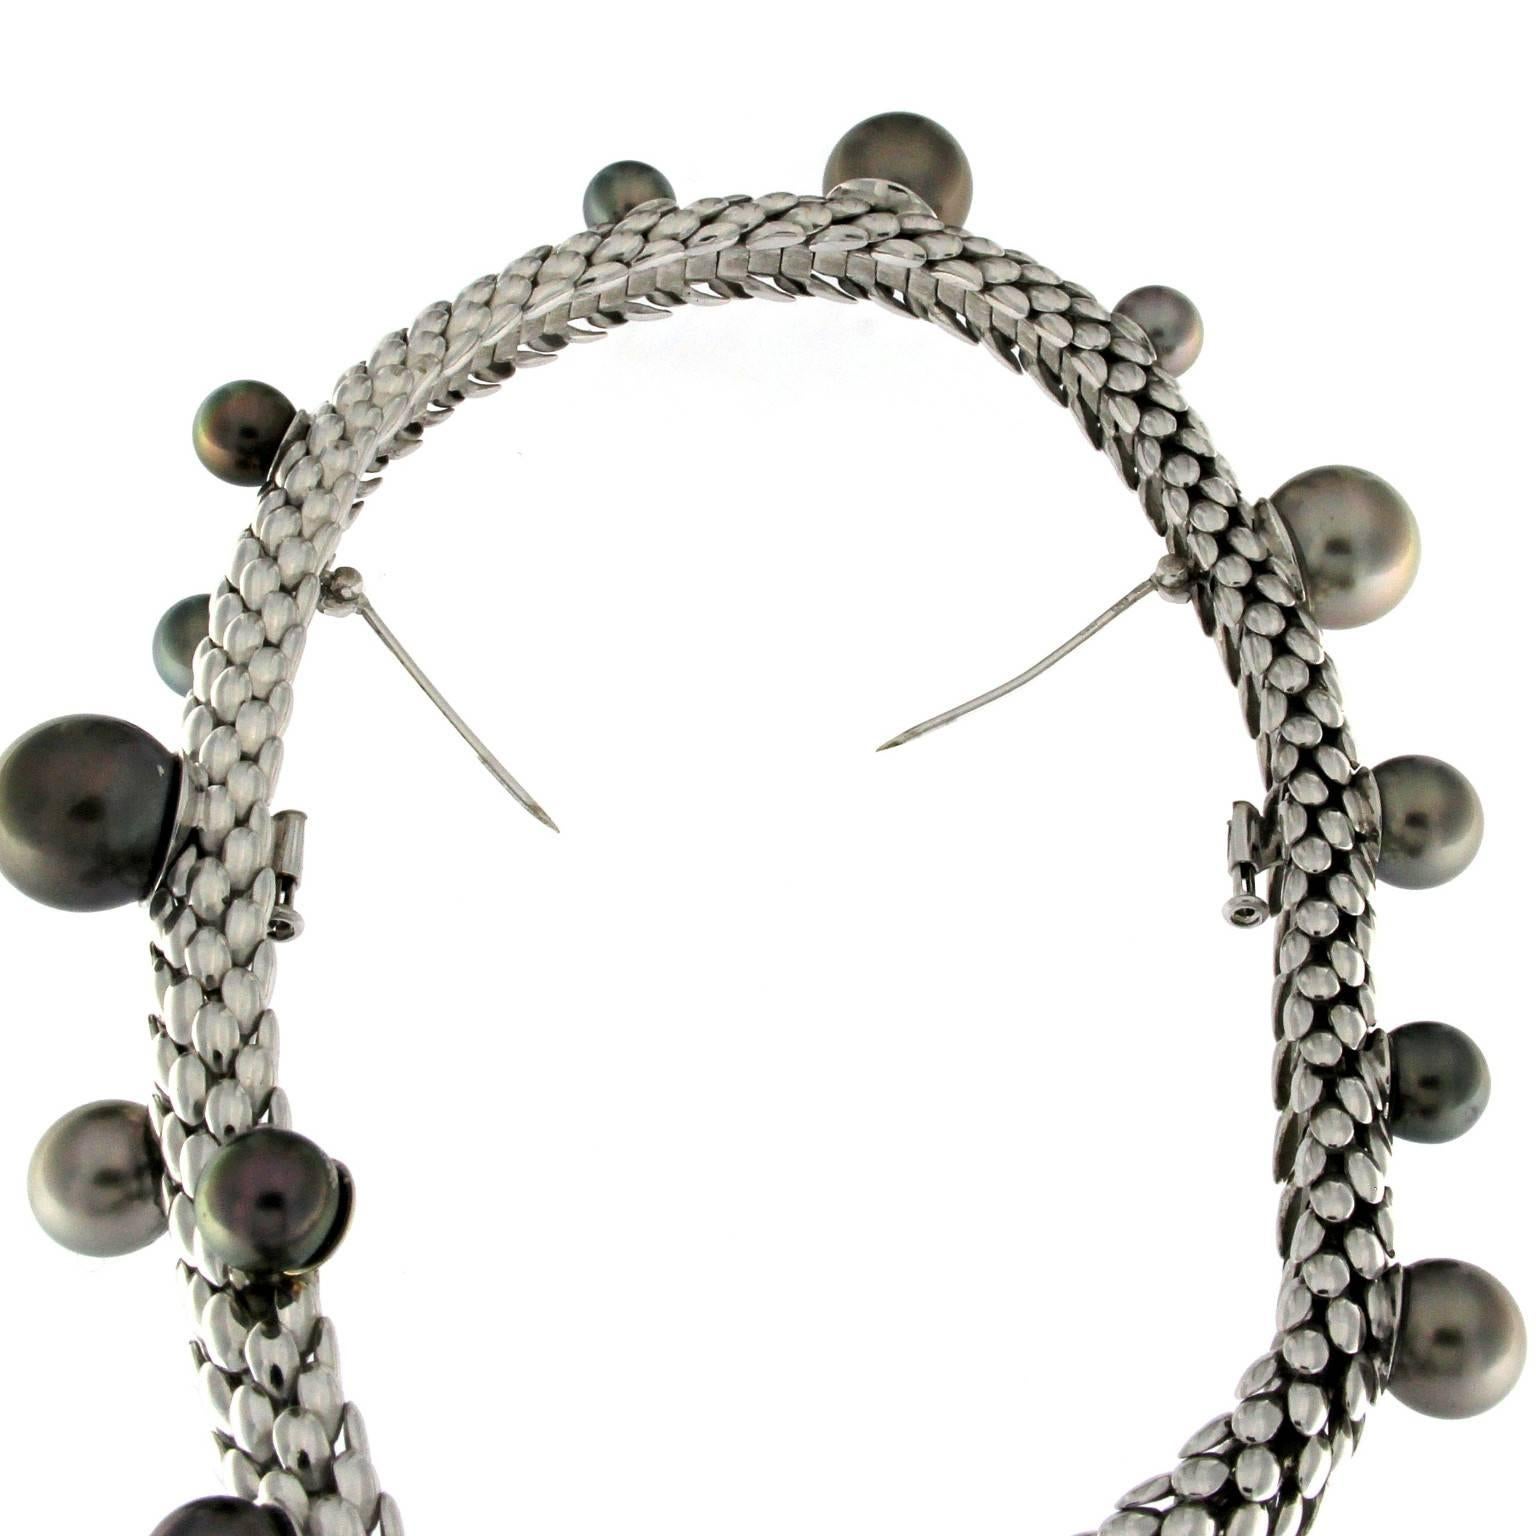 An extraordinary piece this that won the second place of the hawards of the 2002 of the South Sea Tahitian pearls Contest.
A sinuous and anatomic brooch with two pins on the back to be connected to the shoulder of the dress in order to dress it with